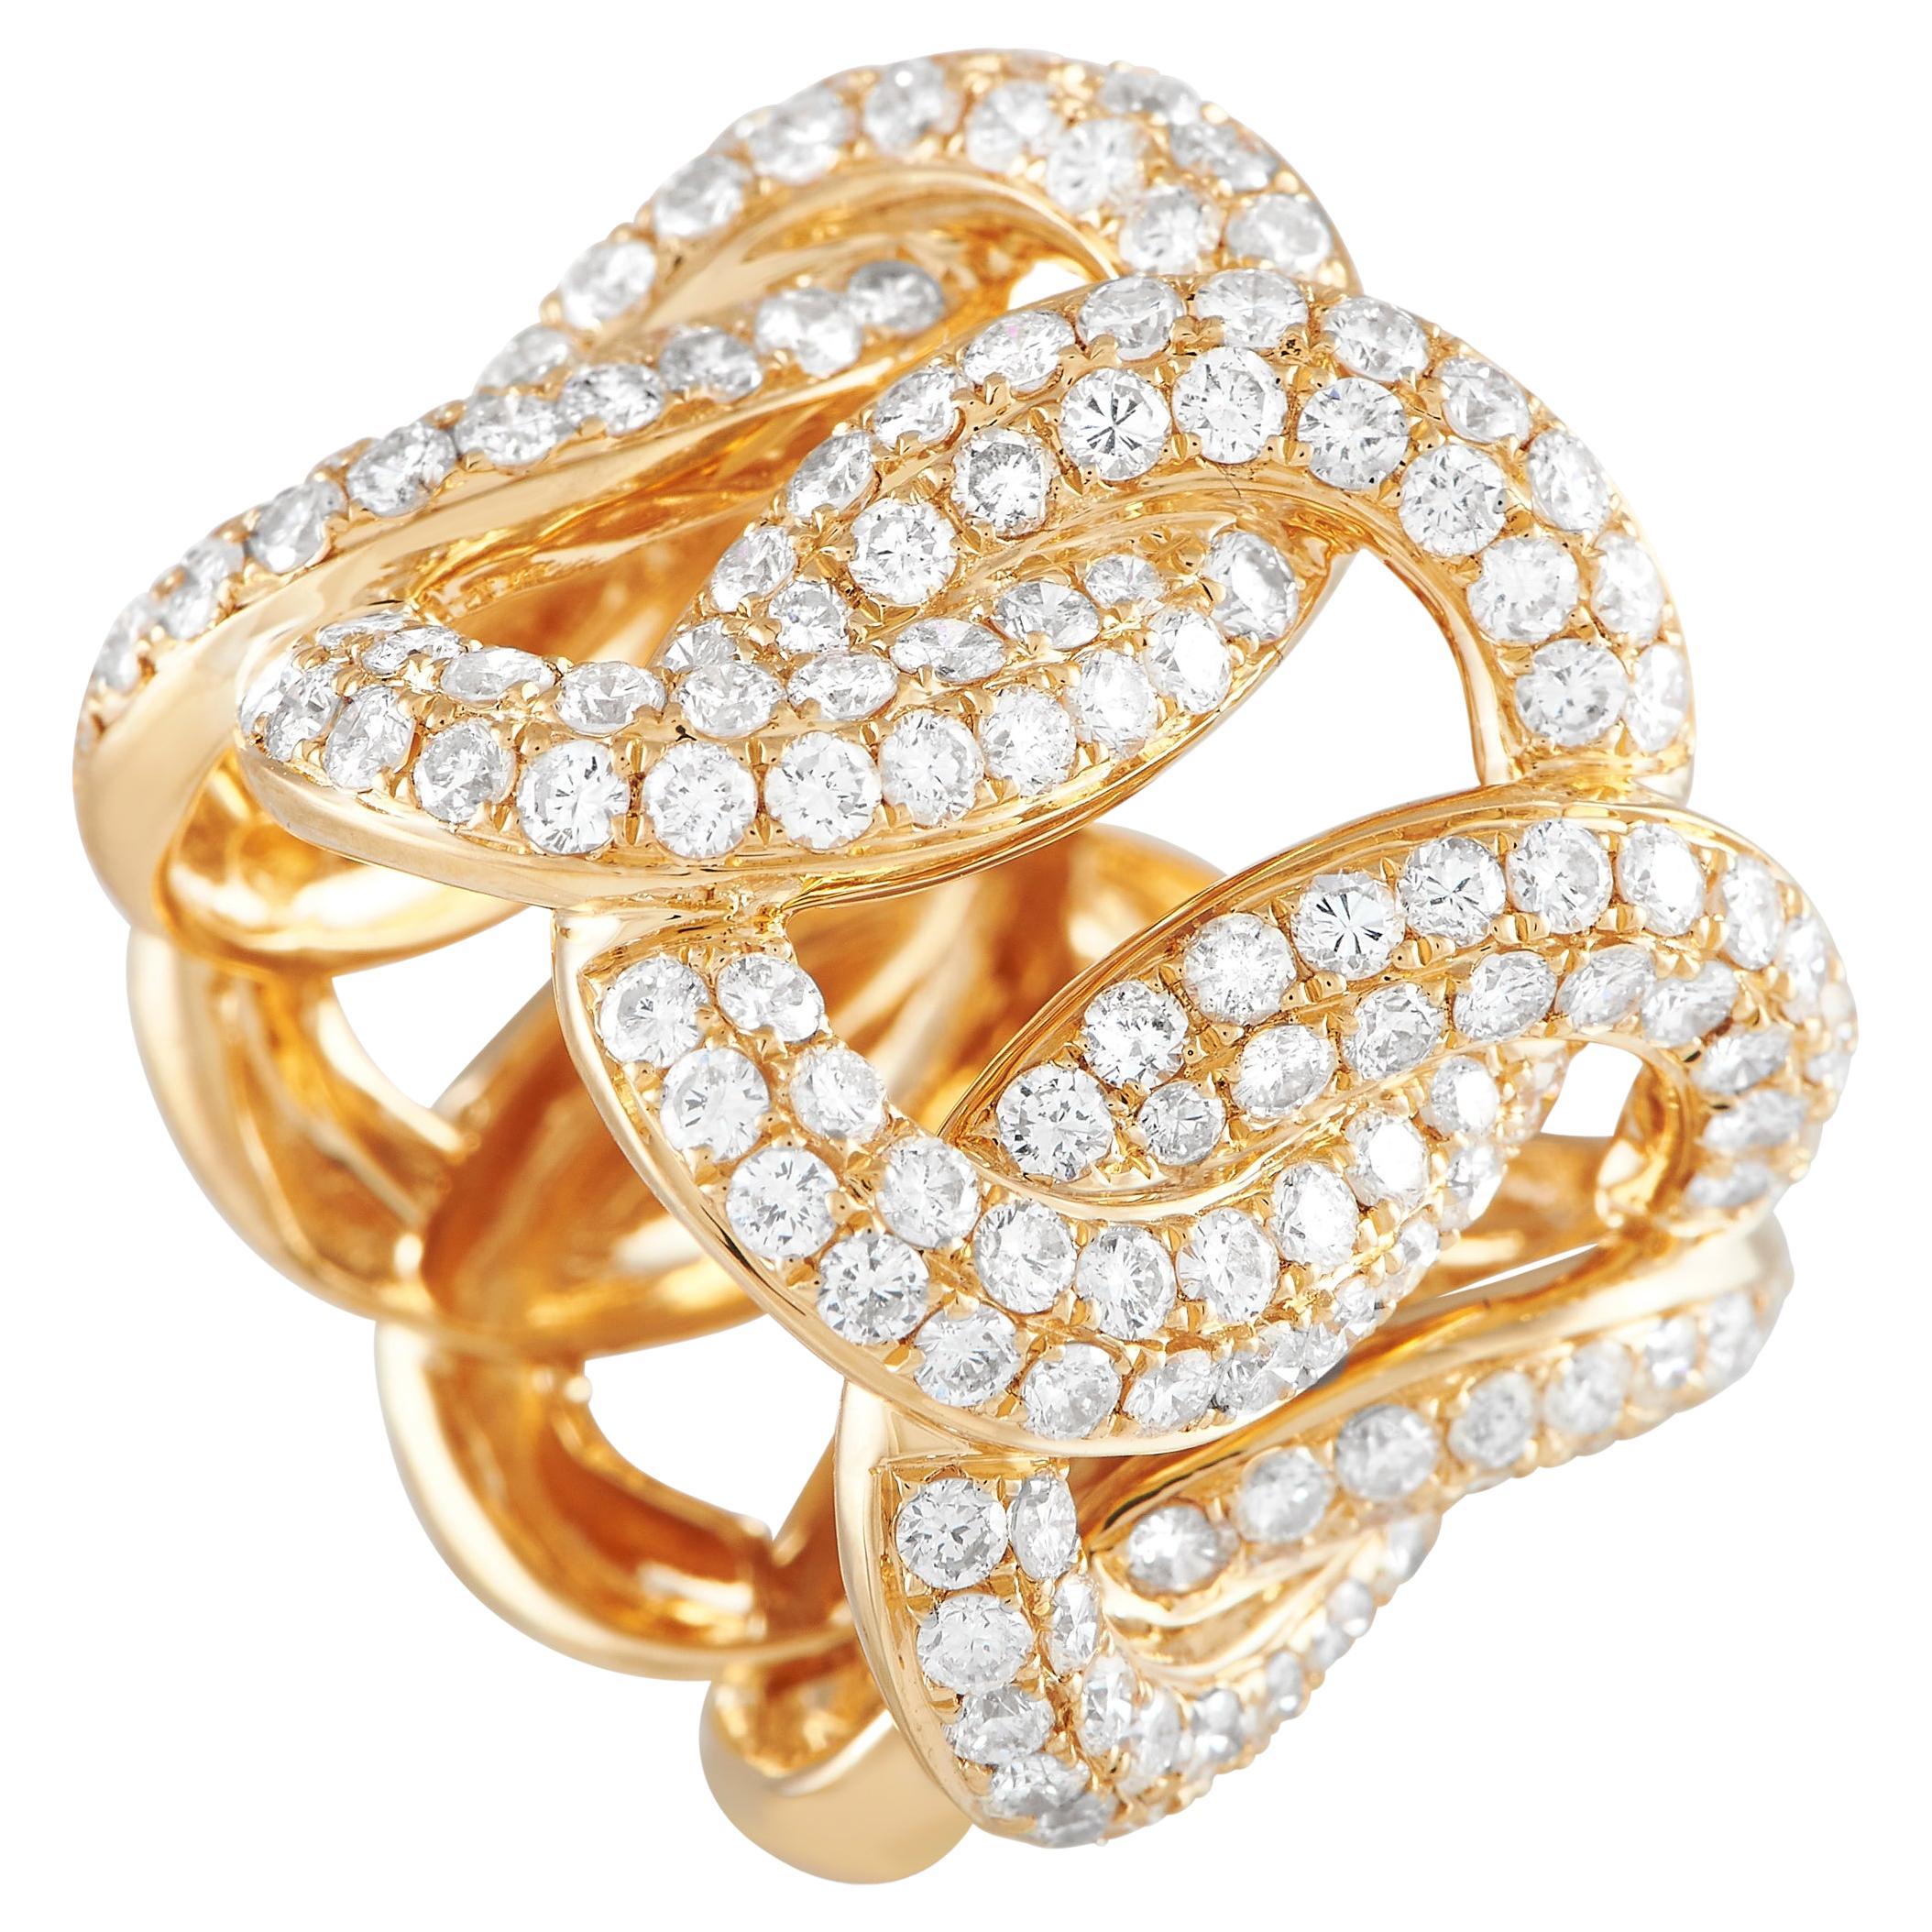 LB Exclusive 18k Yellow Gold 3.10 Carat Diamond Wide Band Ring For Sale